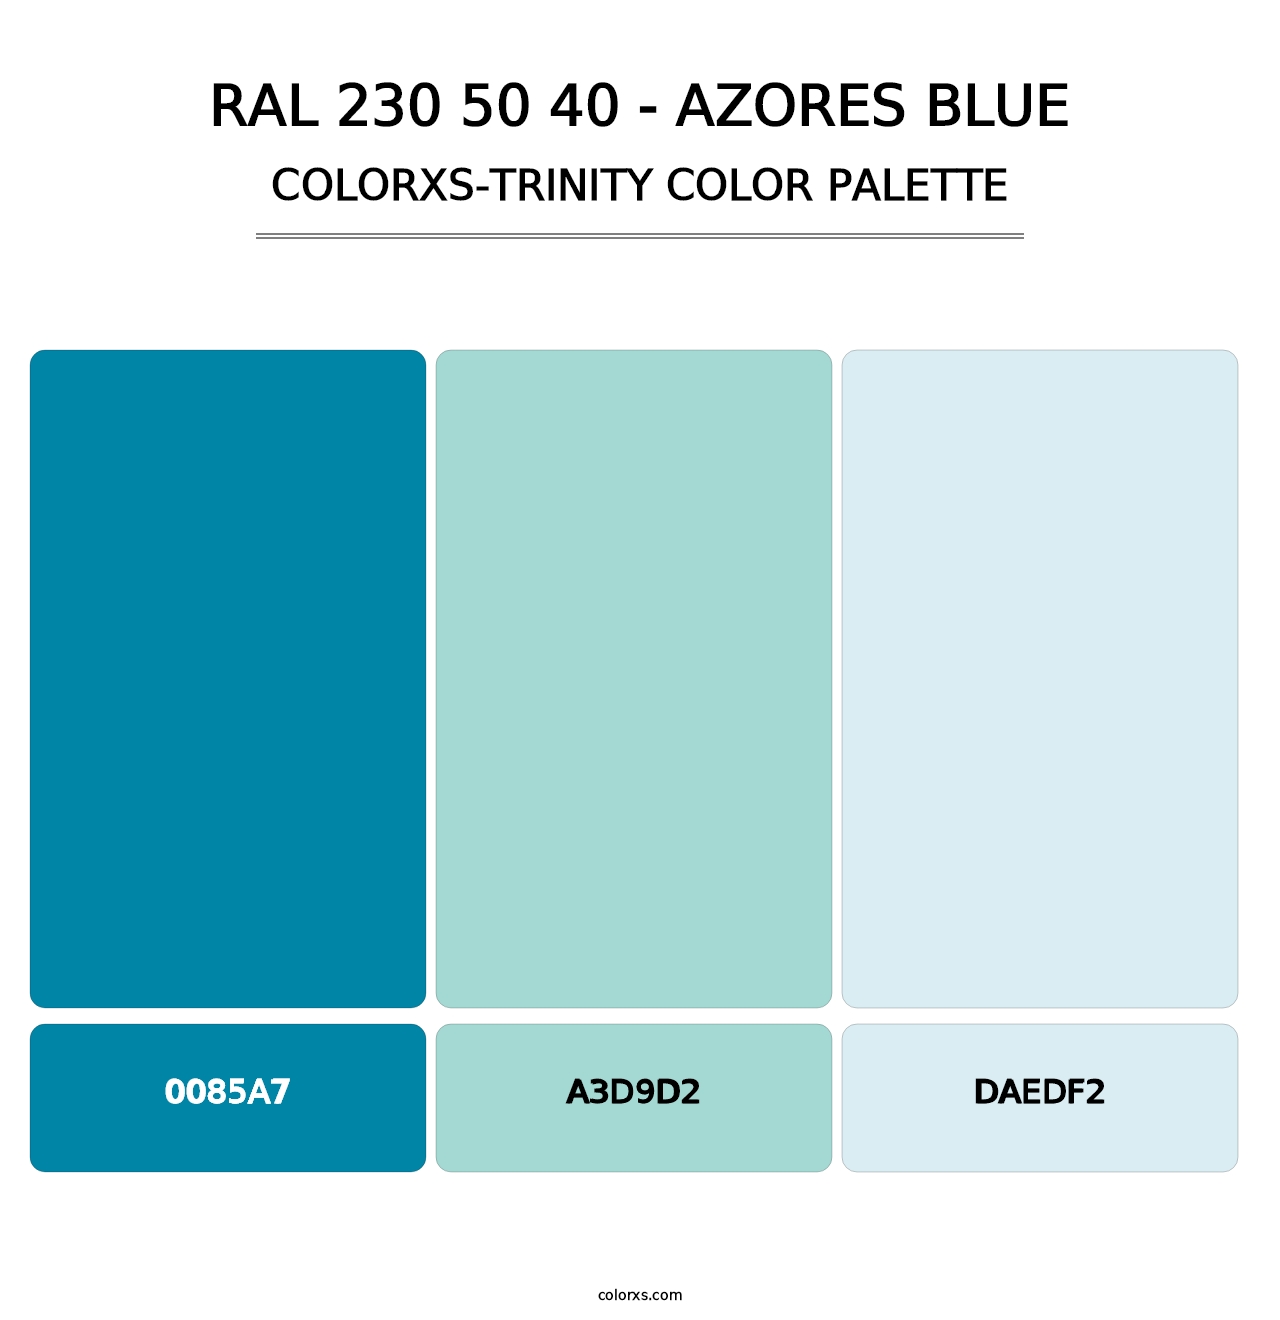 RAL 230 50 40 - Azores Blue - Colorxs Trinity Palette